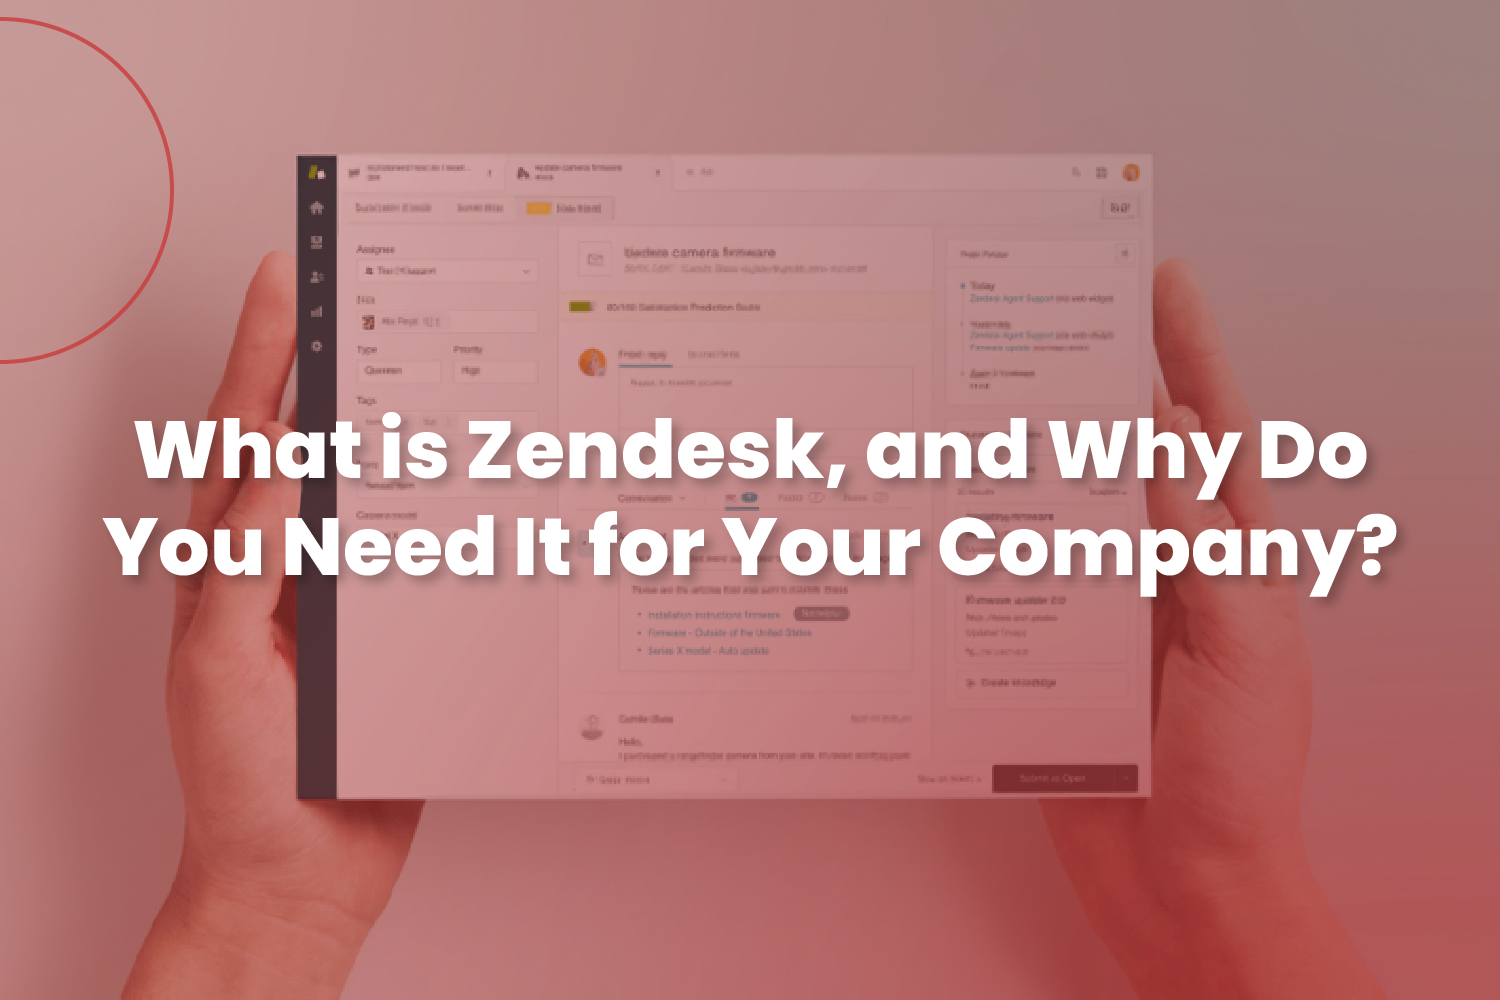 What is Zendesk, and Why Do You Need It for Your Company?